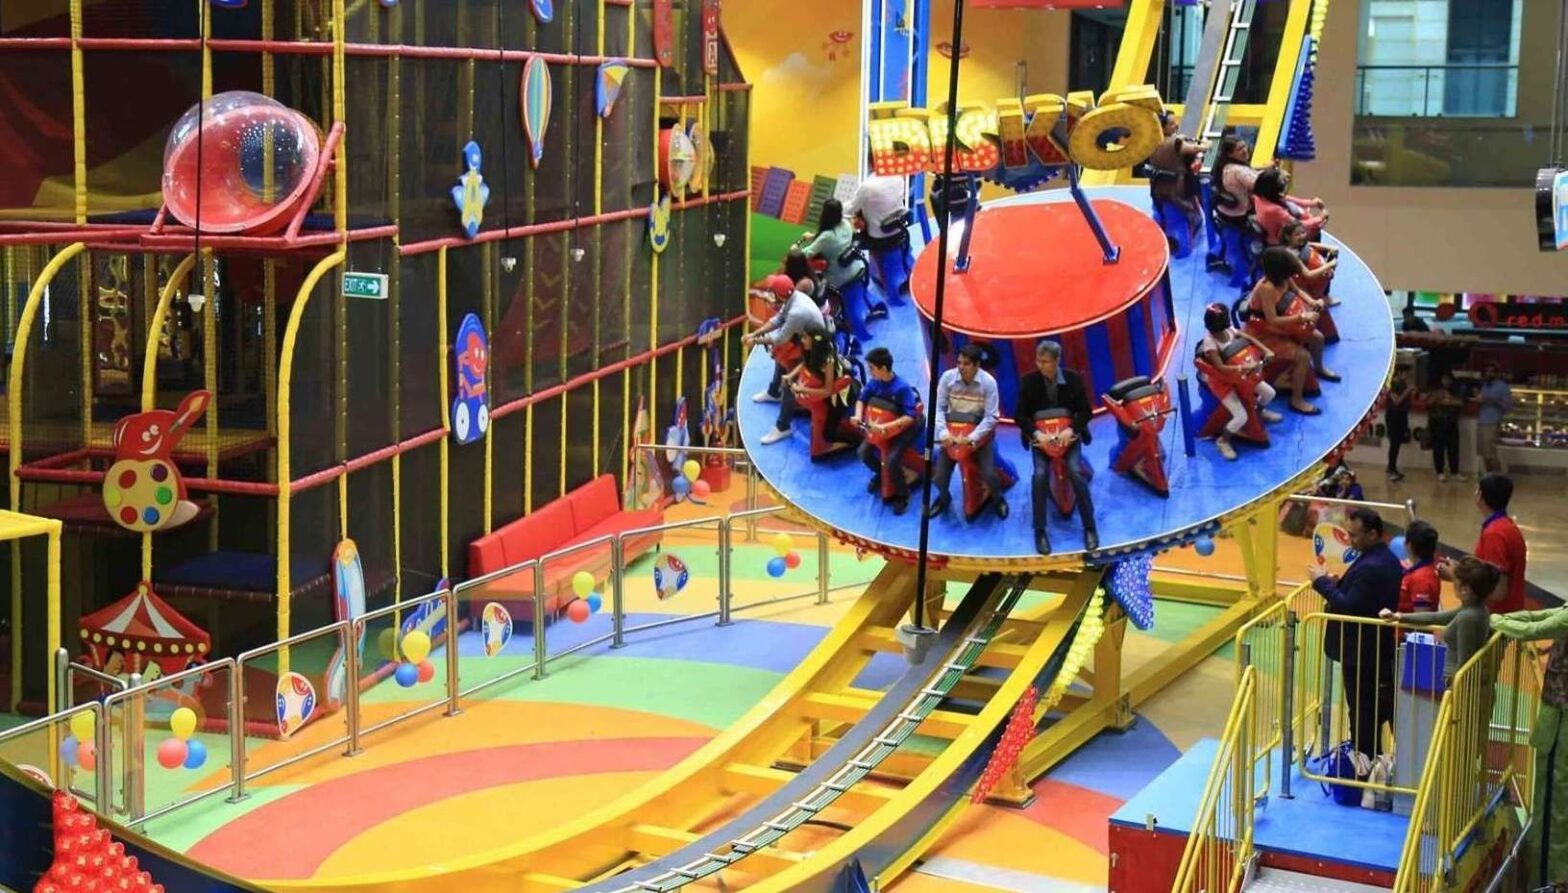 Family/Indoor Entertainment Centres Market